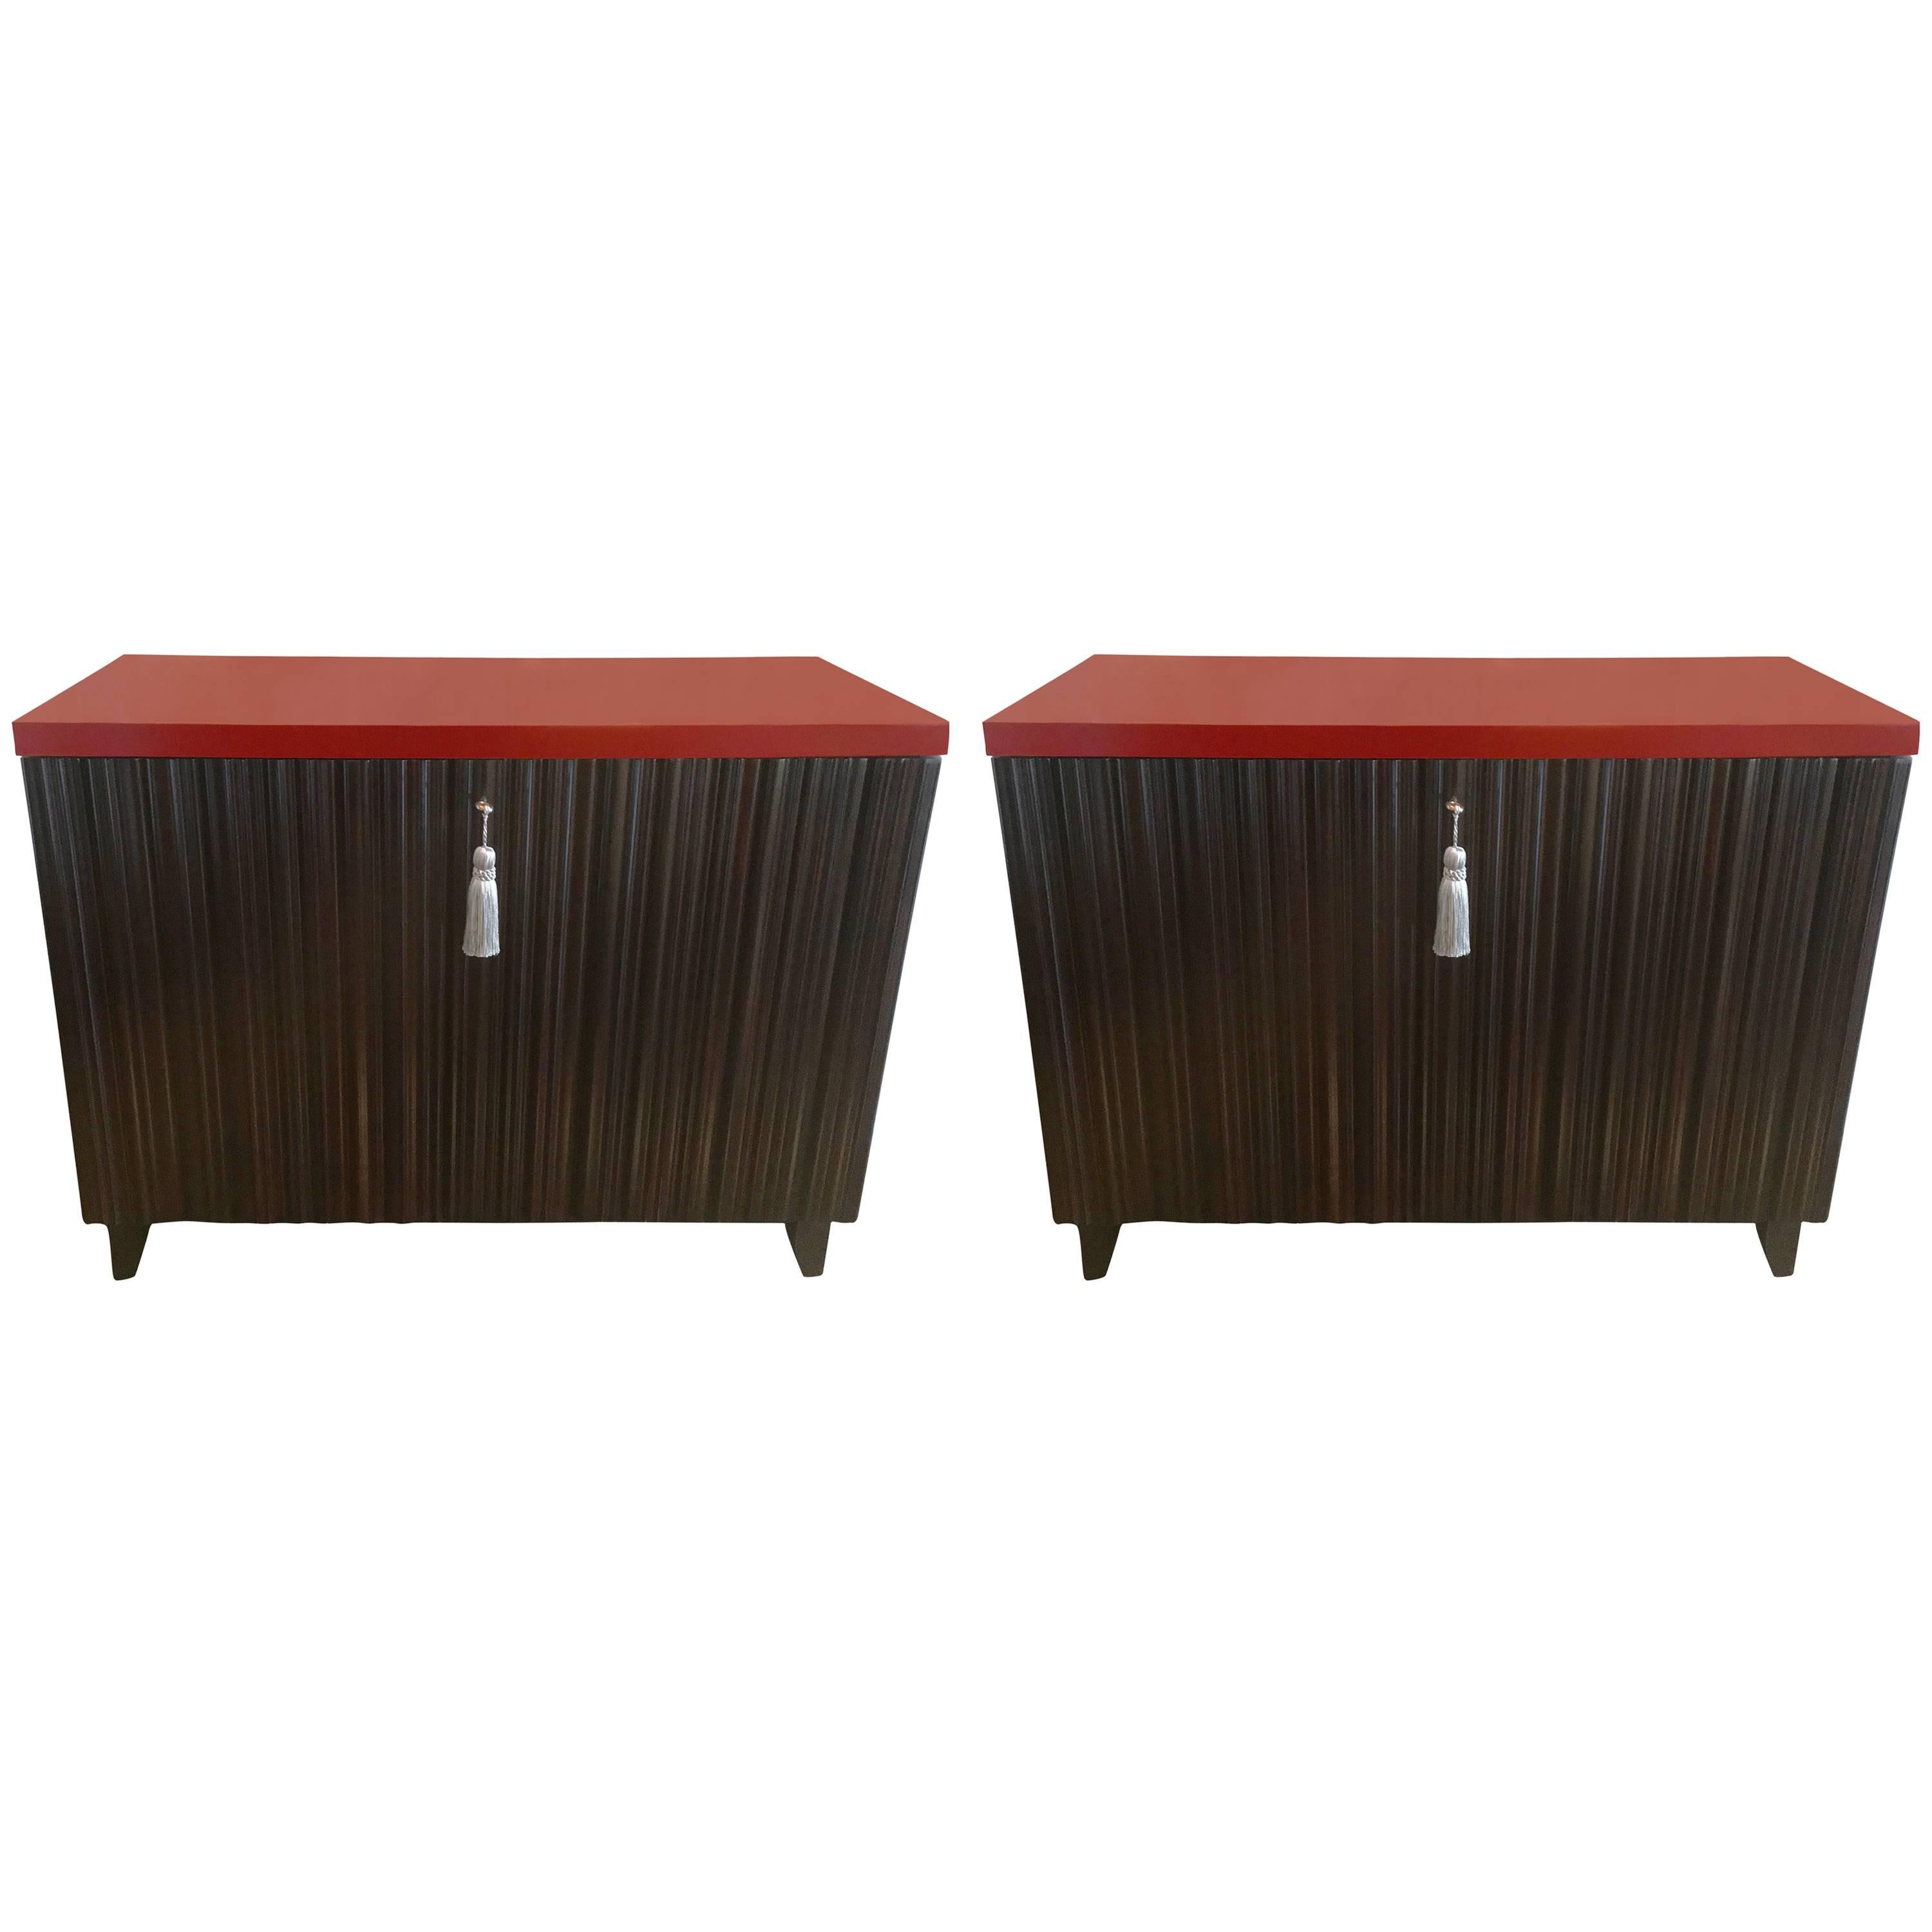 Spectacular Pair of Classy Laura Kirar Designed Commodes by Baker